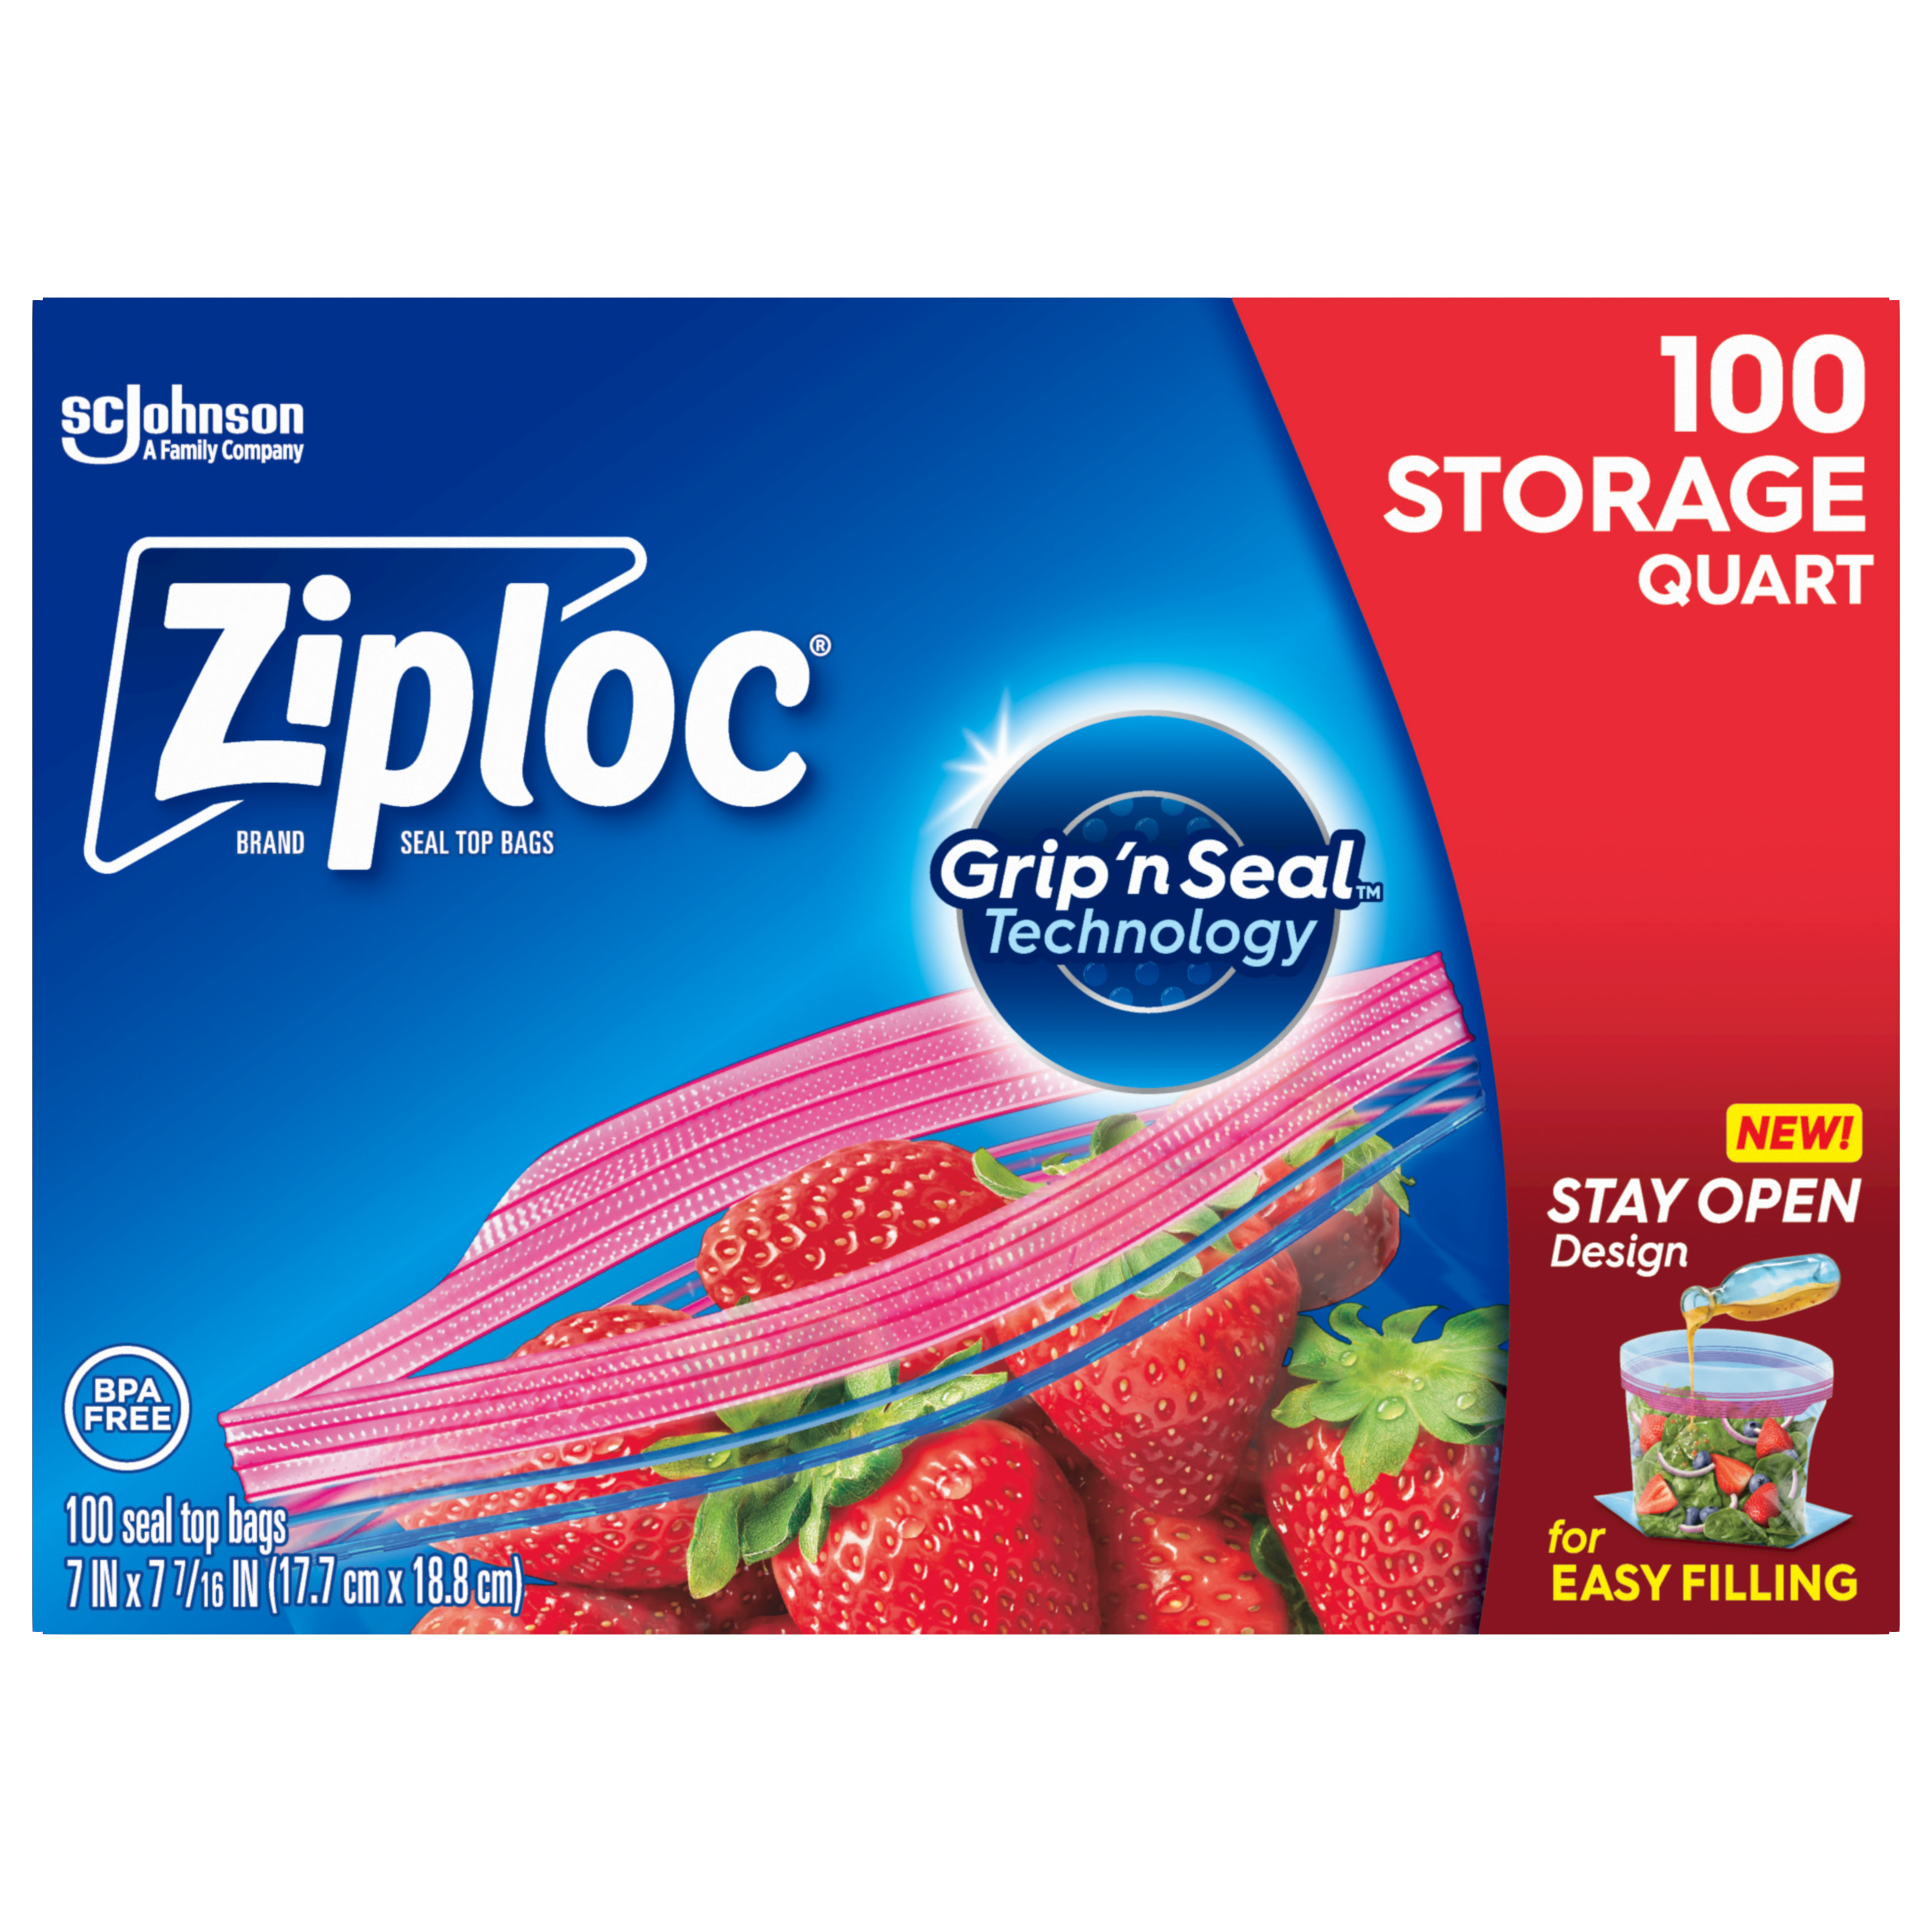 Ziploc® Brand Storage Bags with New Stay Open Design, Quart, 100 Count ...